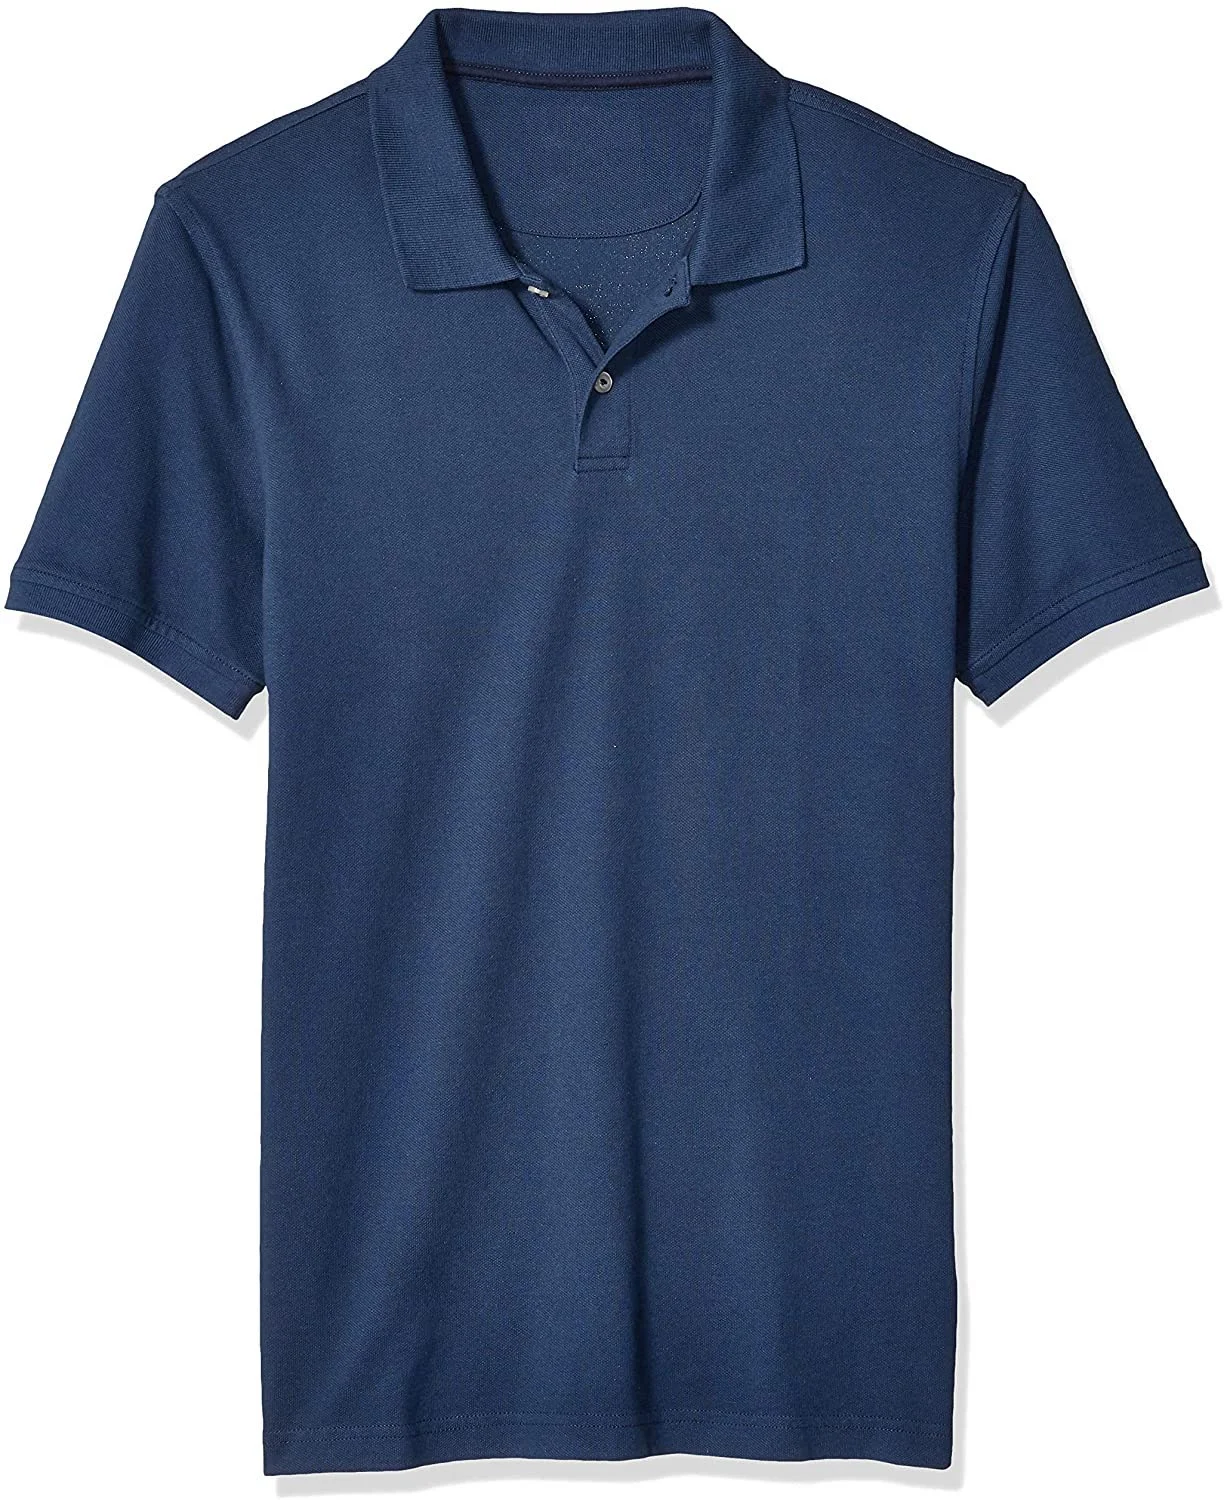 School Polo Shirts - Bangladesh Factory, Suppliers, Manufacturers